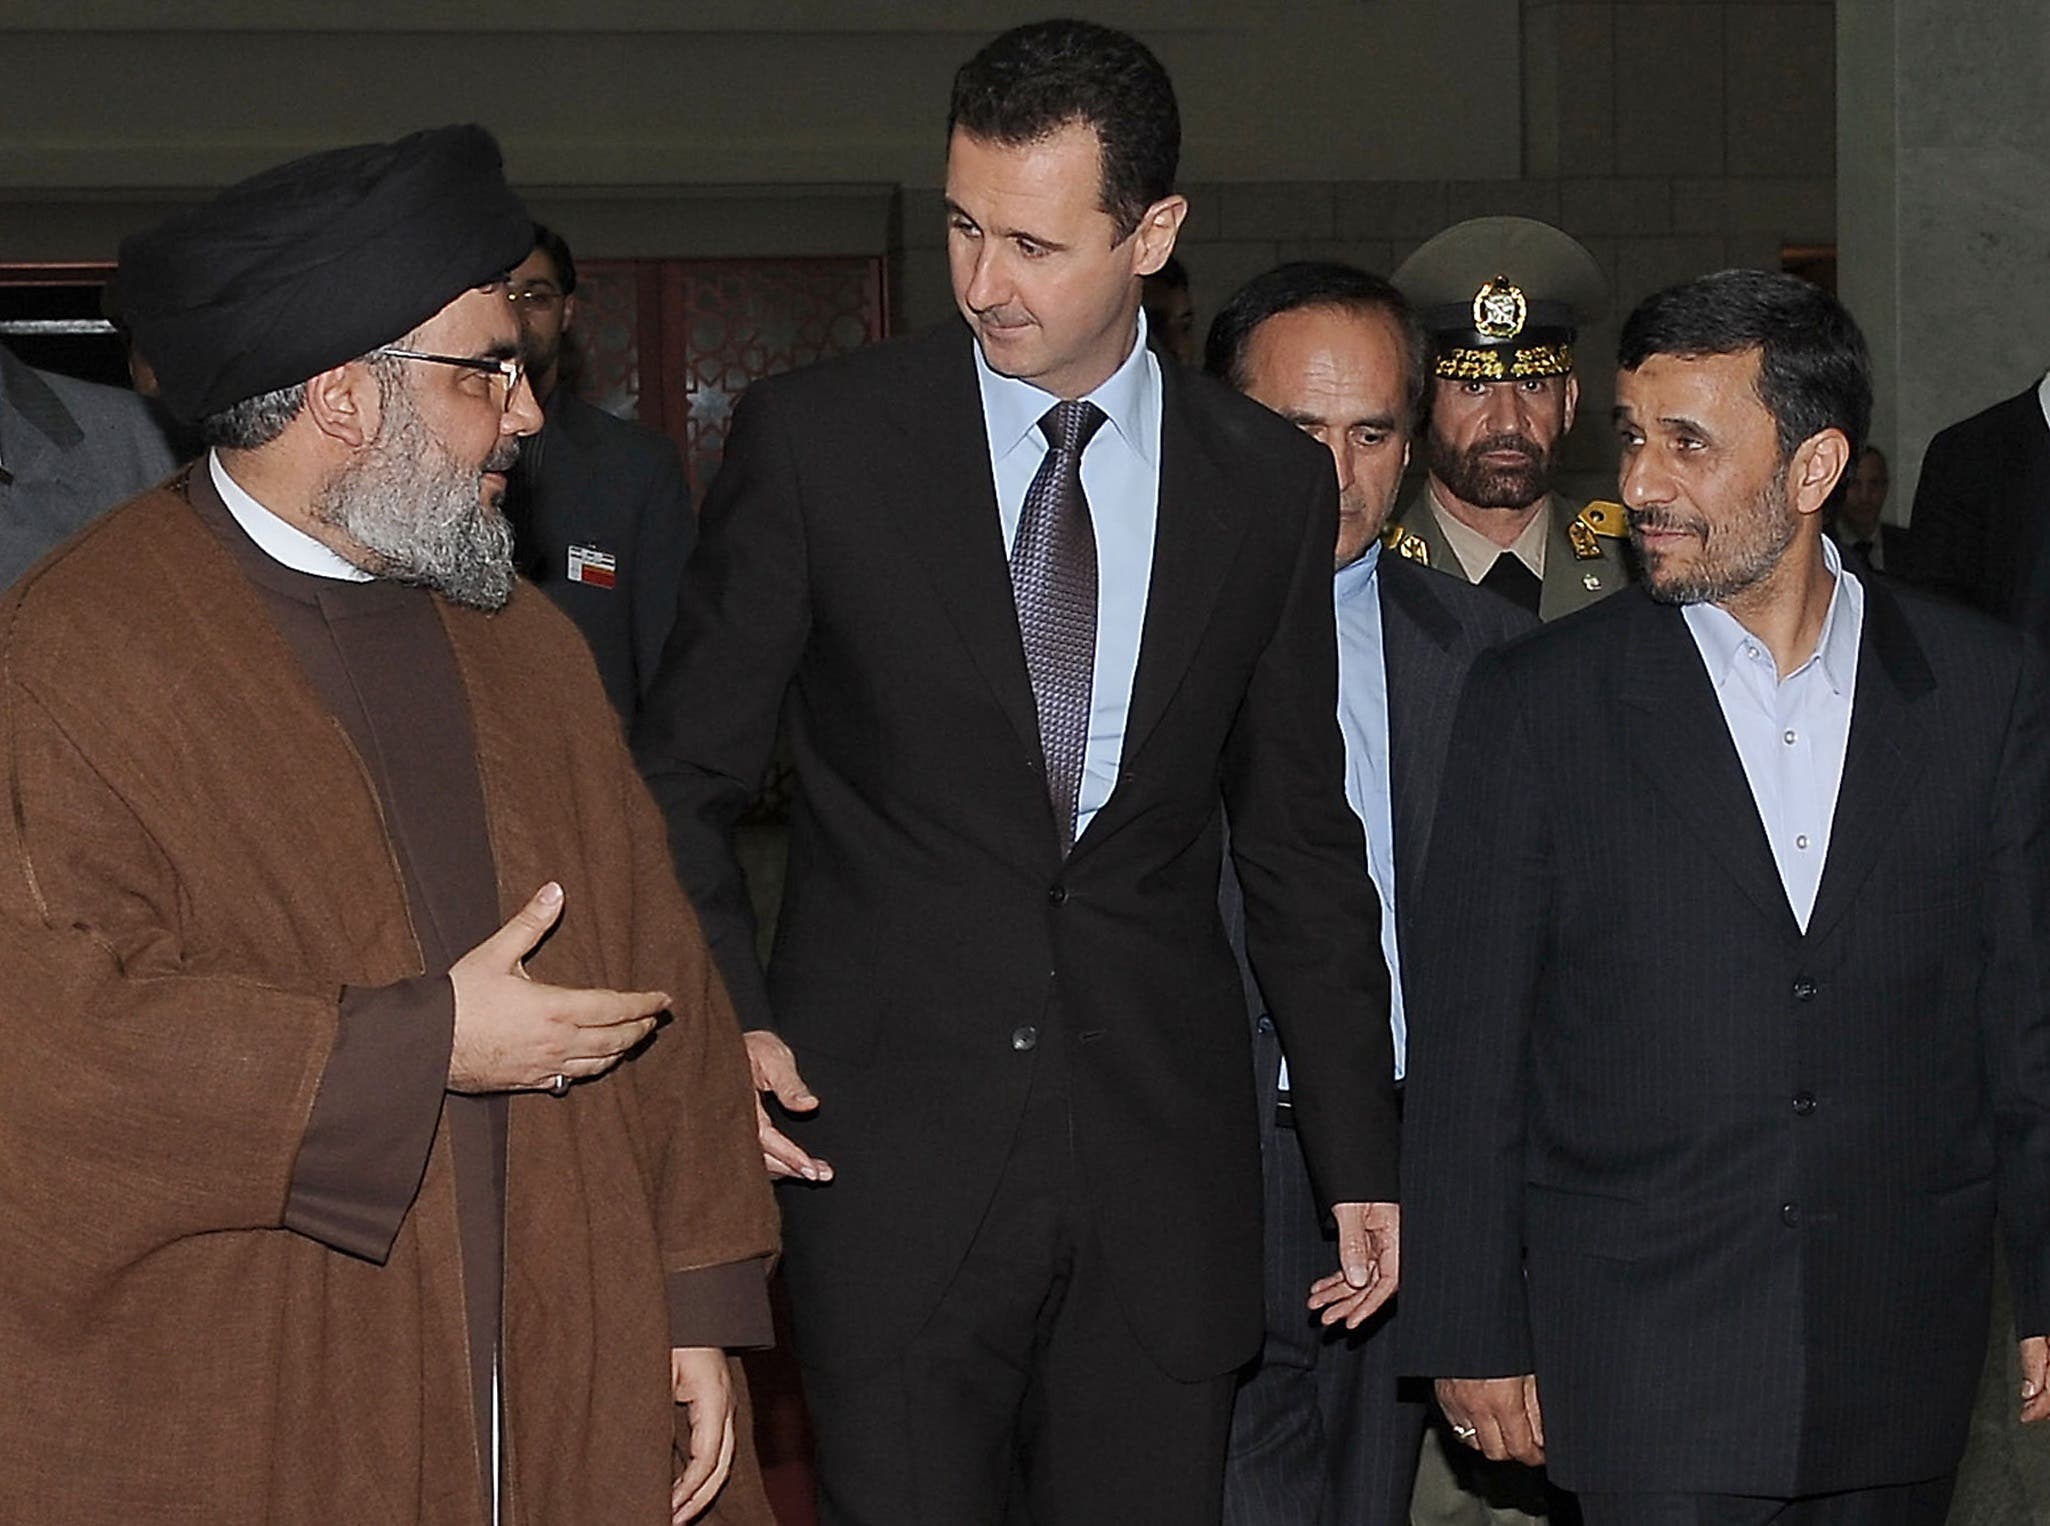 Lebanon's Hezbollah chief Hassan Nasrallah, Syrian President Bashar al-Assad and his Iranian counterpart Mahmoud Ahmadinejad arriving for an official dinner in Damascus on February 25, 2010. (AFP)